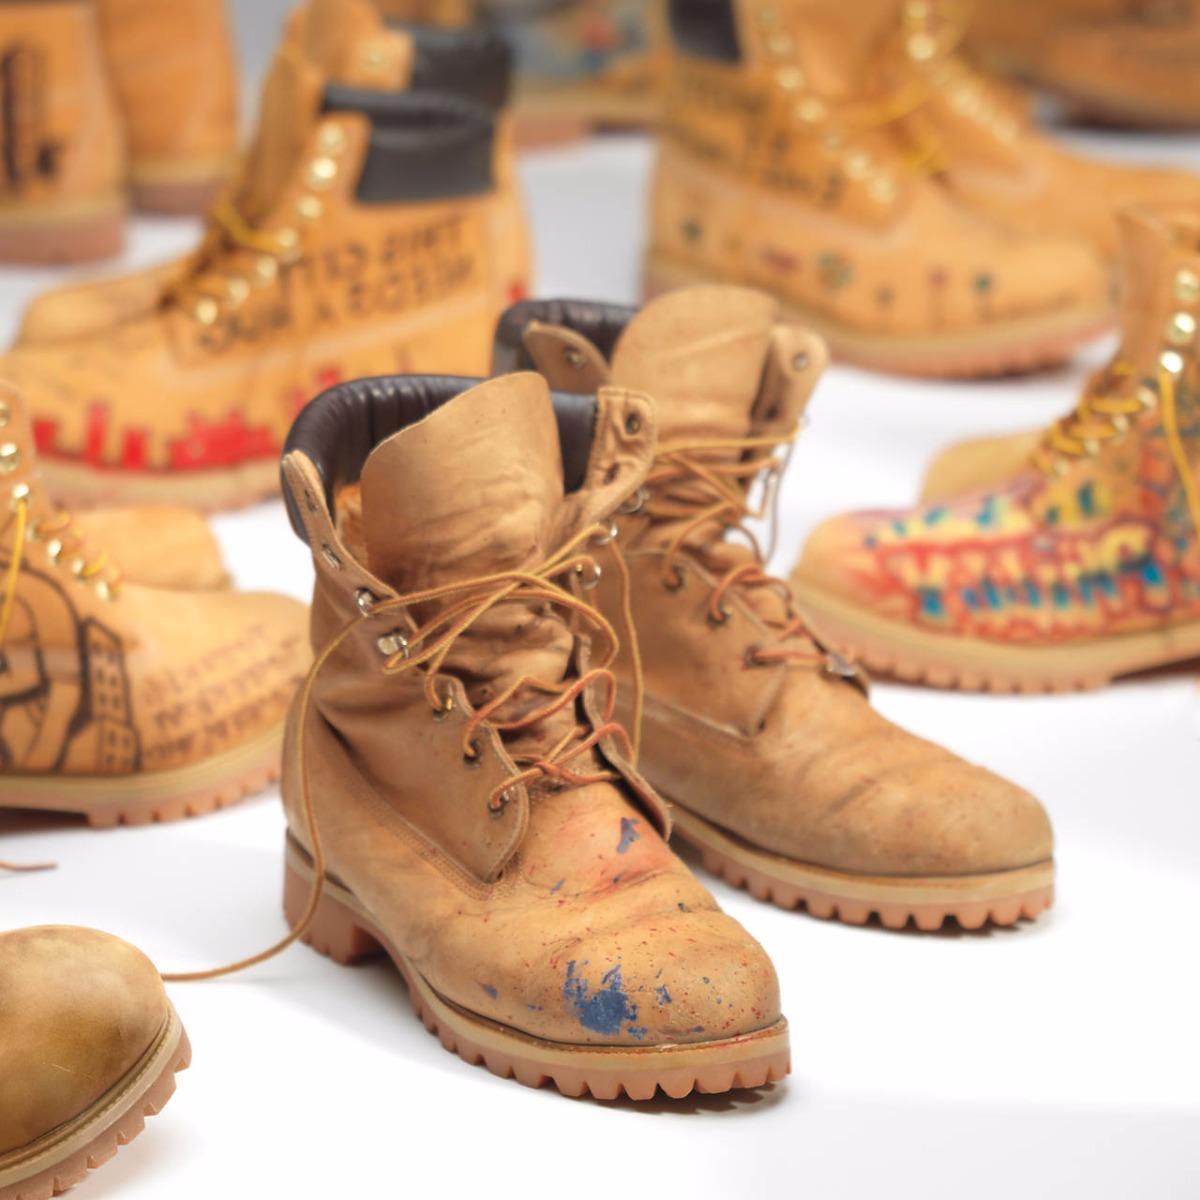 the first timberland boot